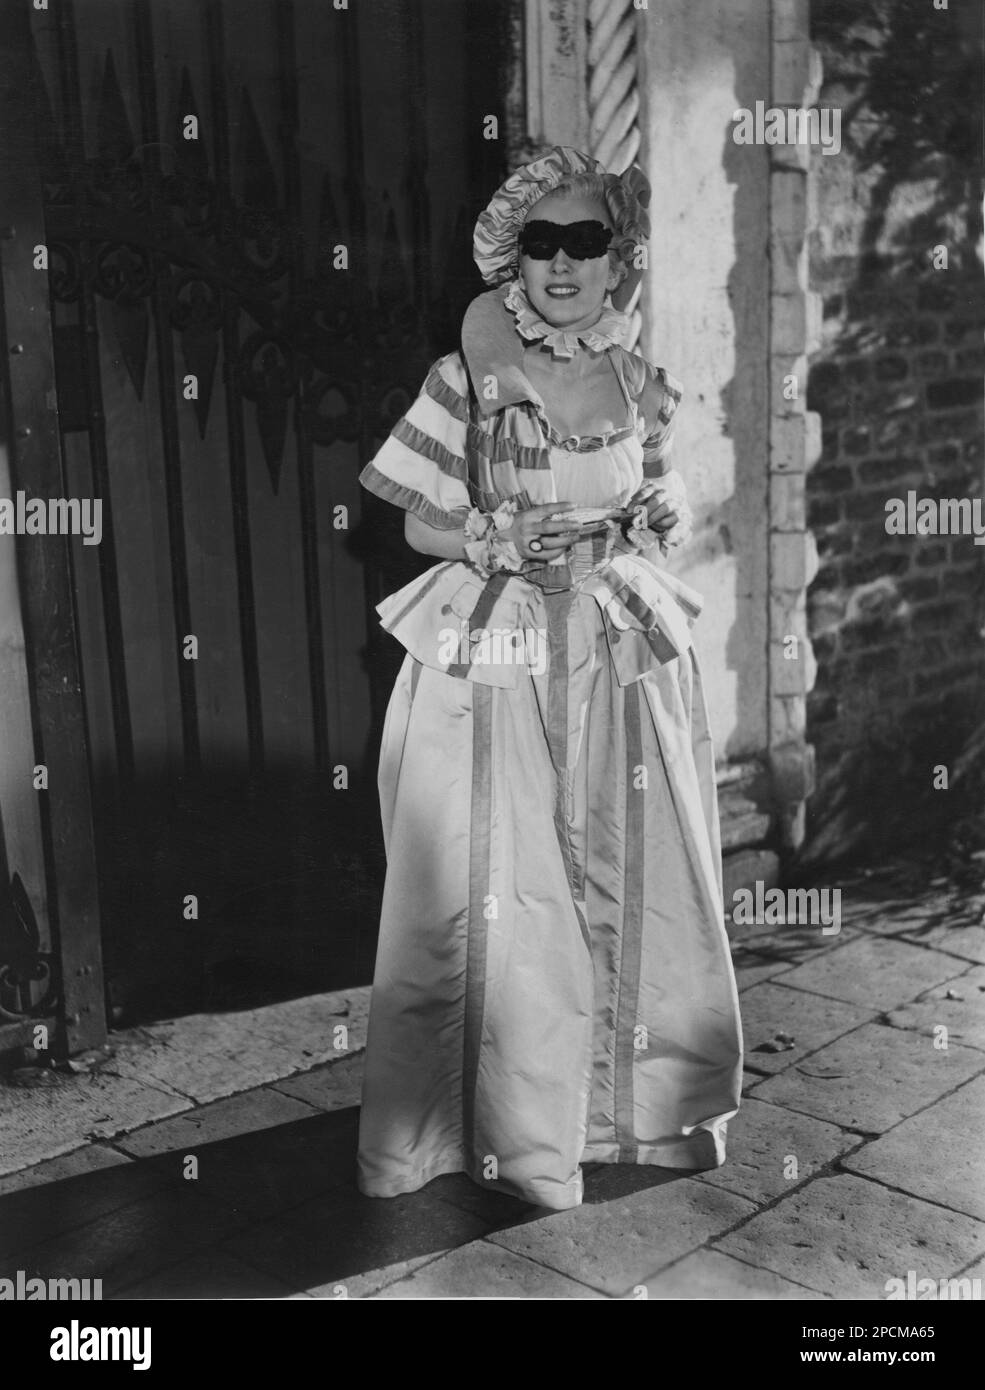 Colombina costume Black and White Stock Photos & Images - Alamy